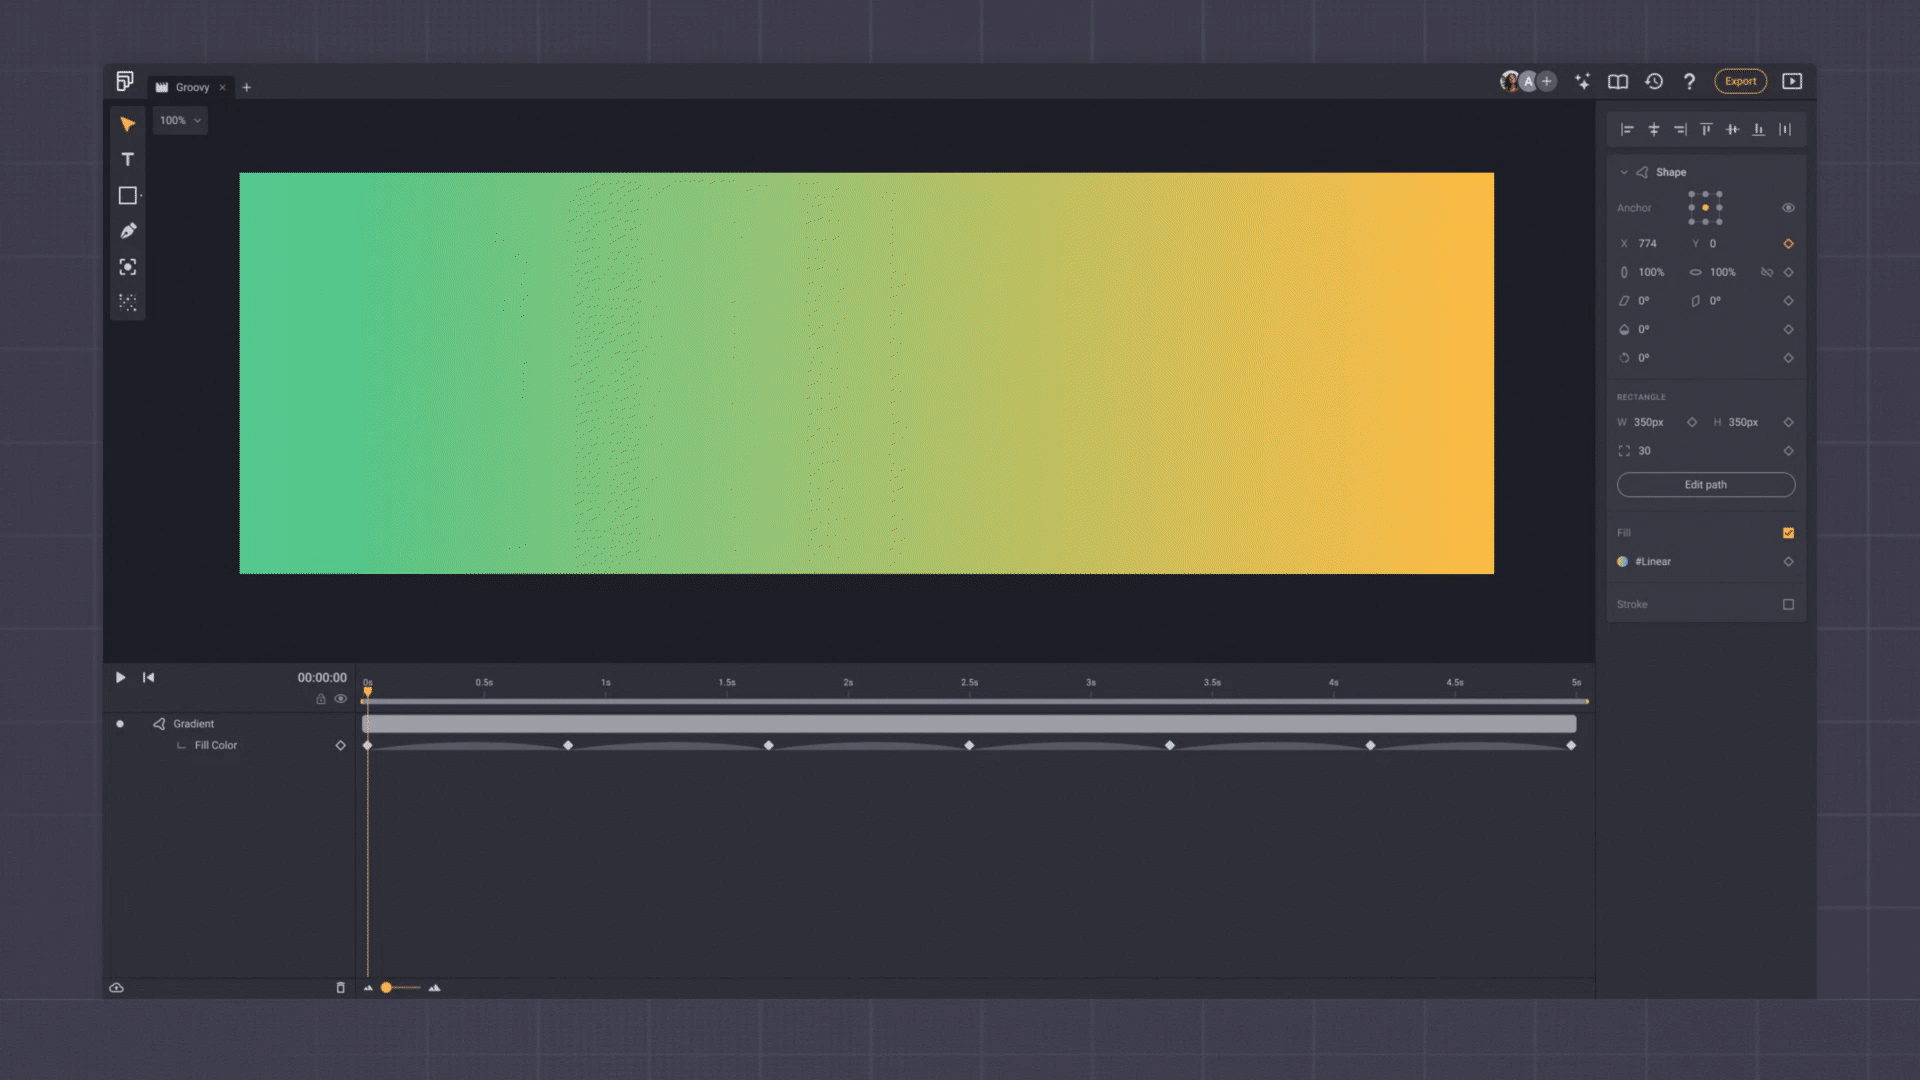 animated screen capture of a gradient changing colors